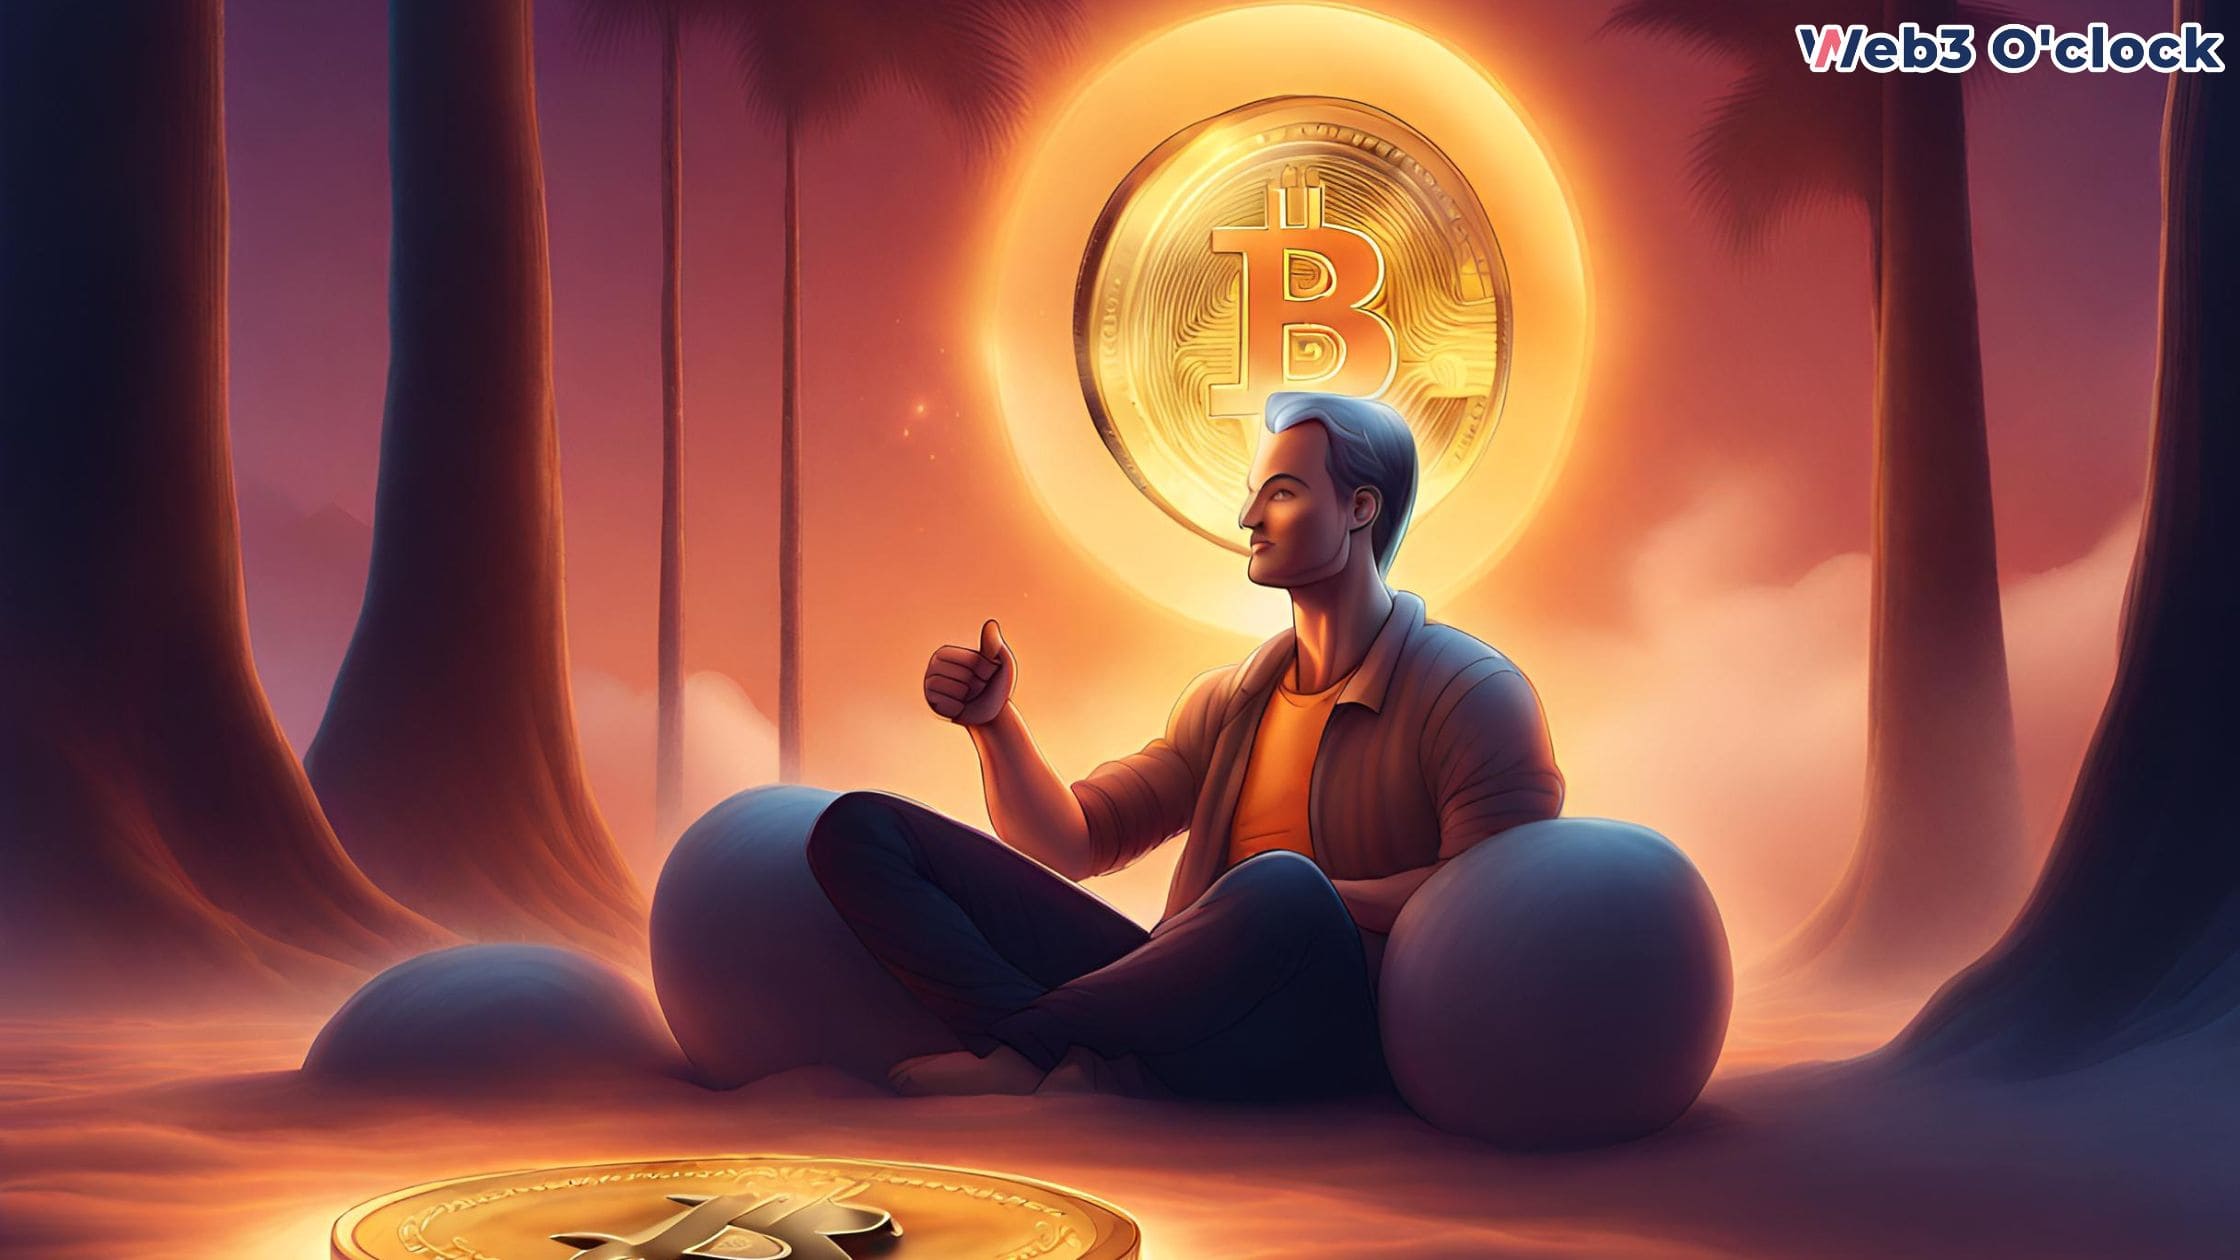 Bitcoin Retreat Just Another Day in Crypto by web3 o'clock